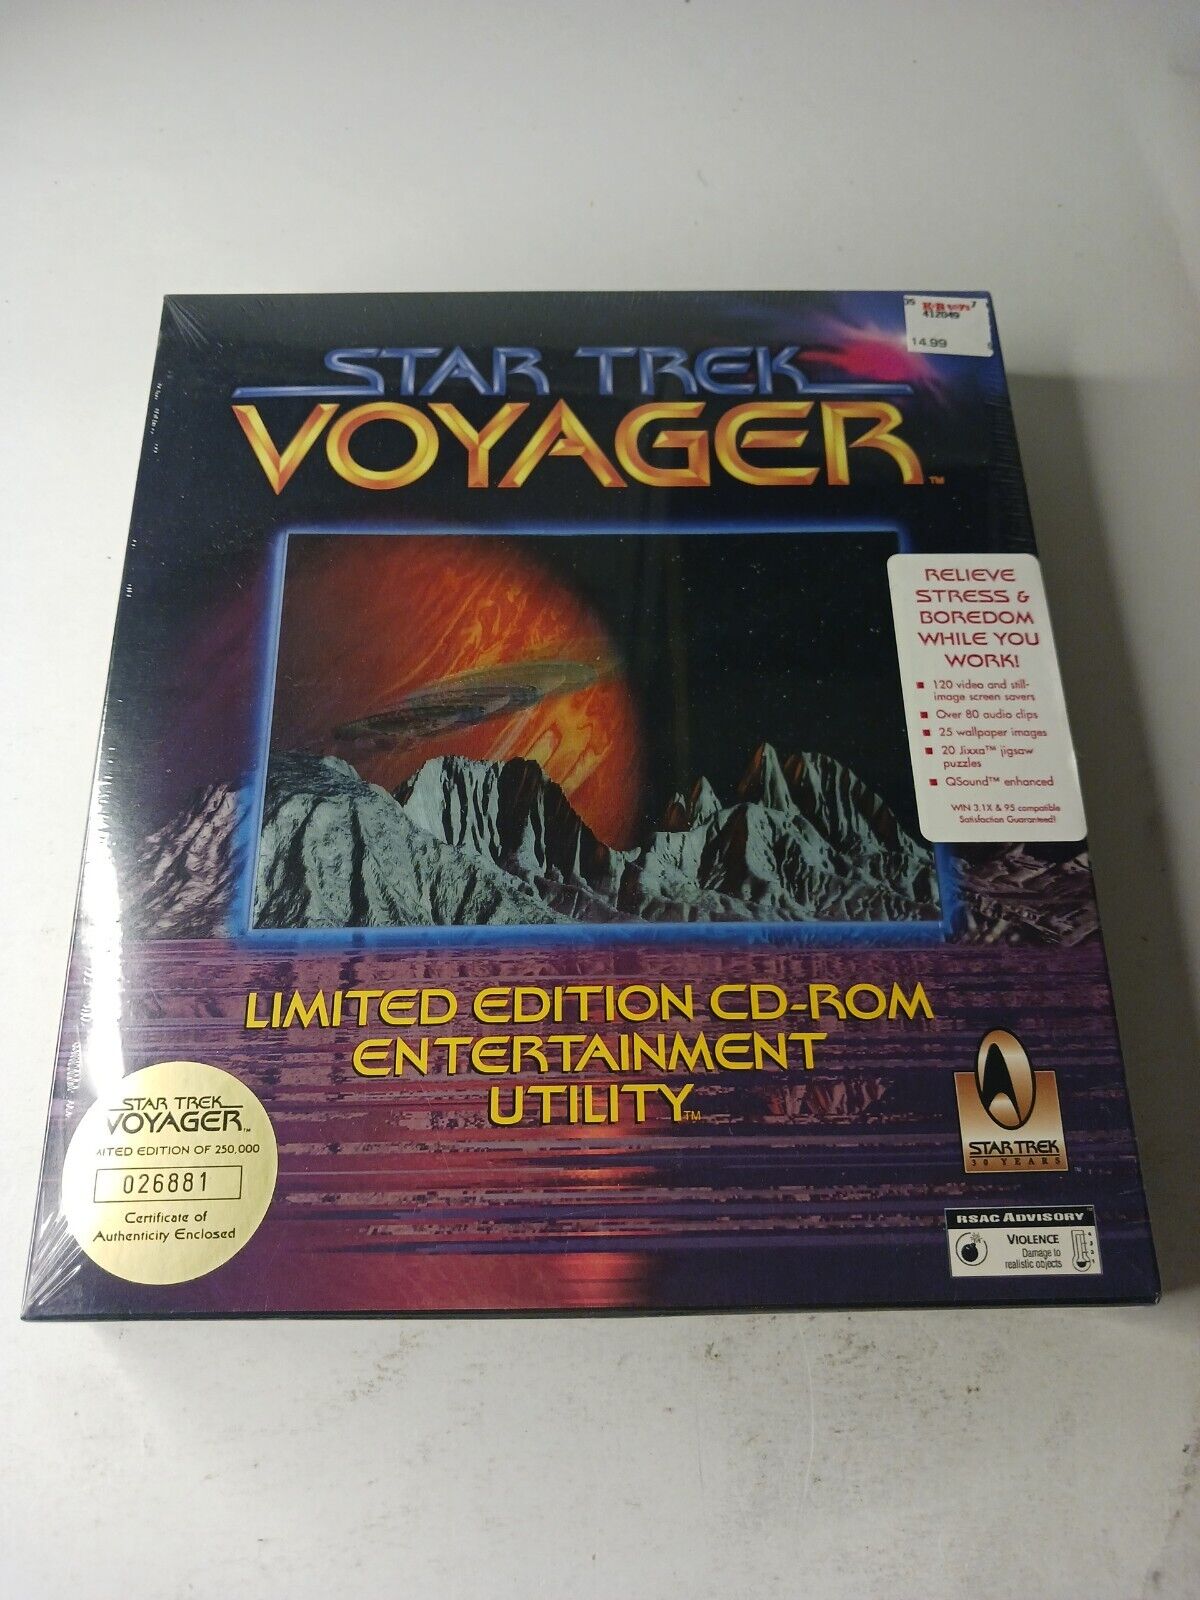 1996 STAR TREK Voyager. CD Limited Edition, Entertainment Utility.